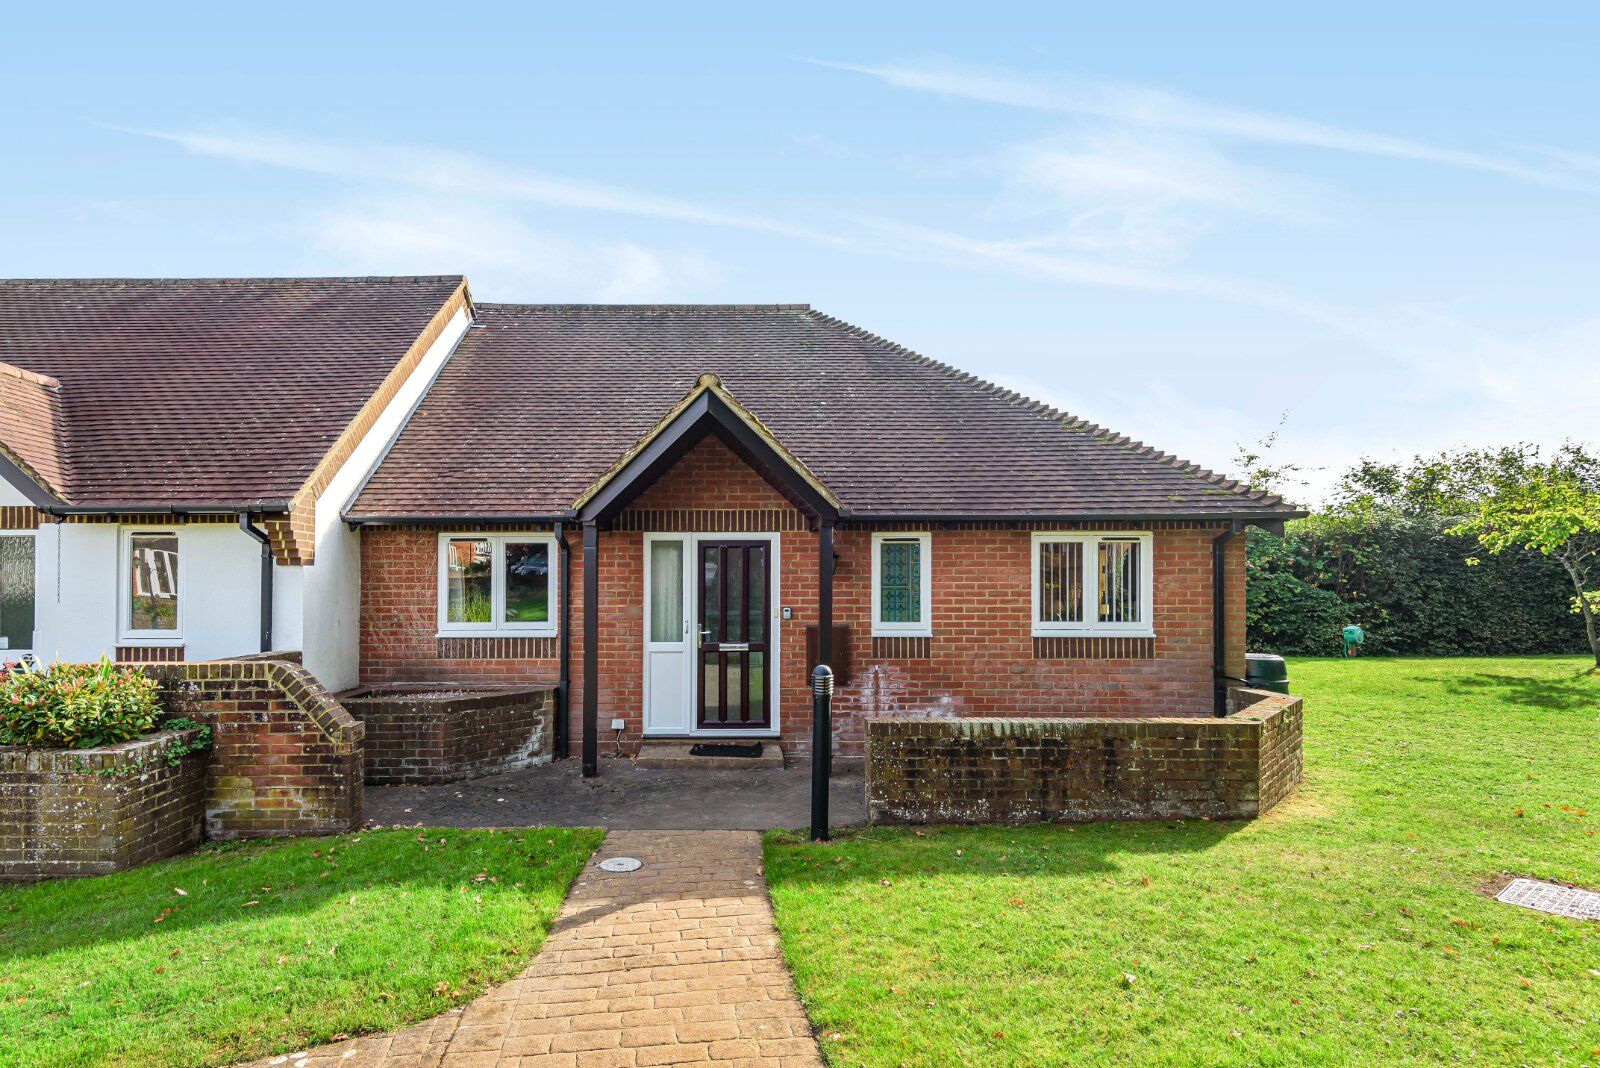 2 bedroom semi detached bungalow for sale War Memorial Place, Henley-on-Thames, RG9, main image